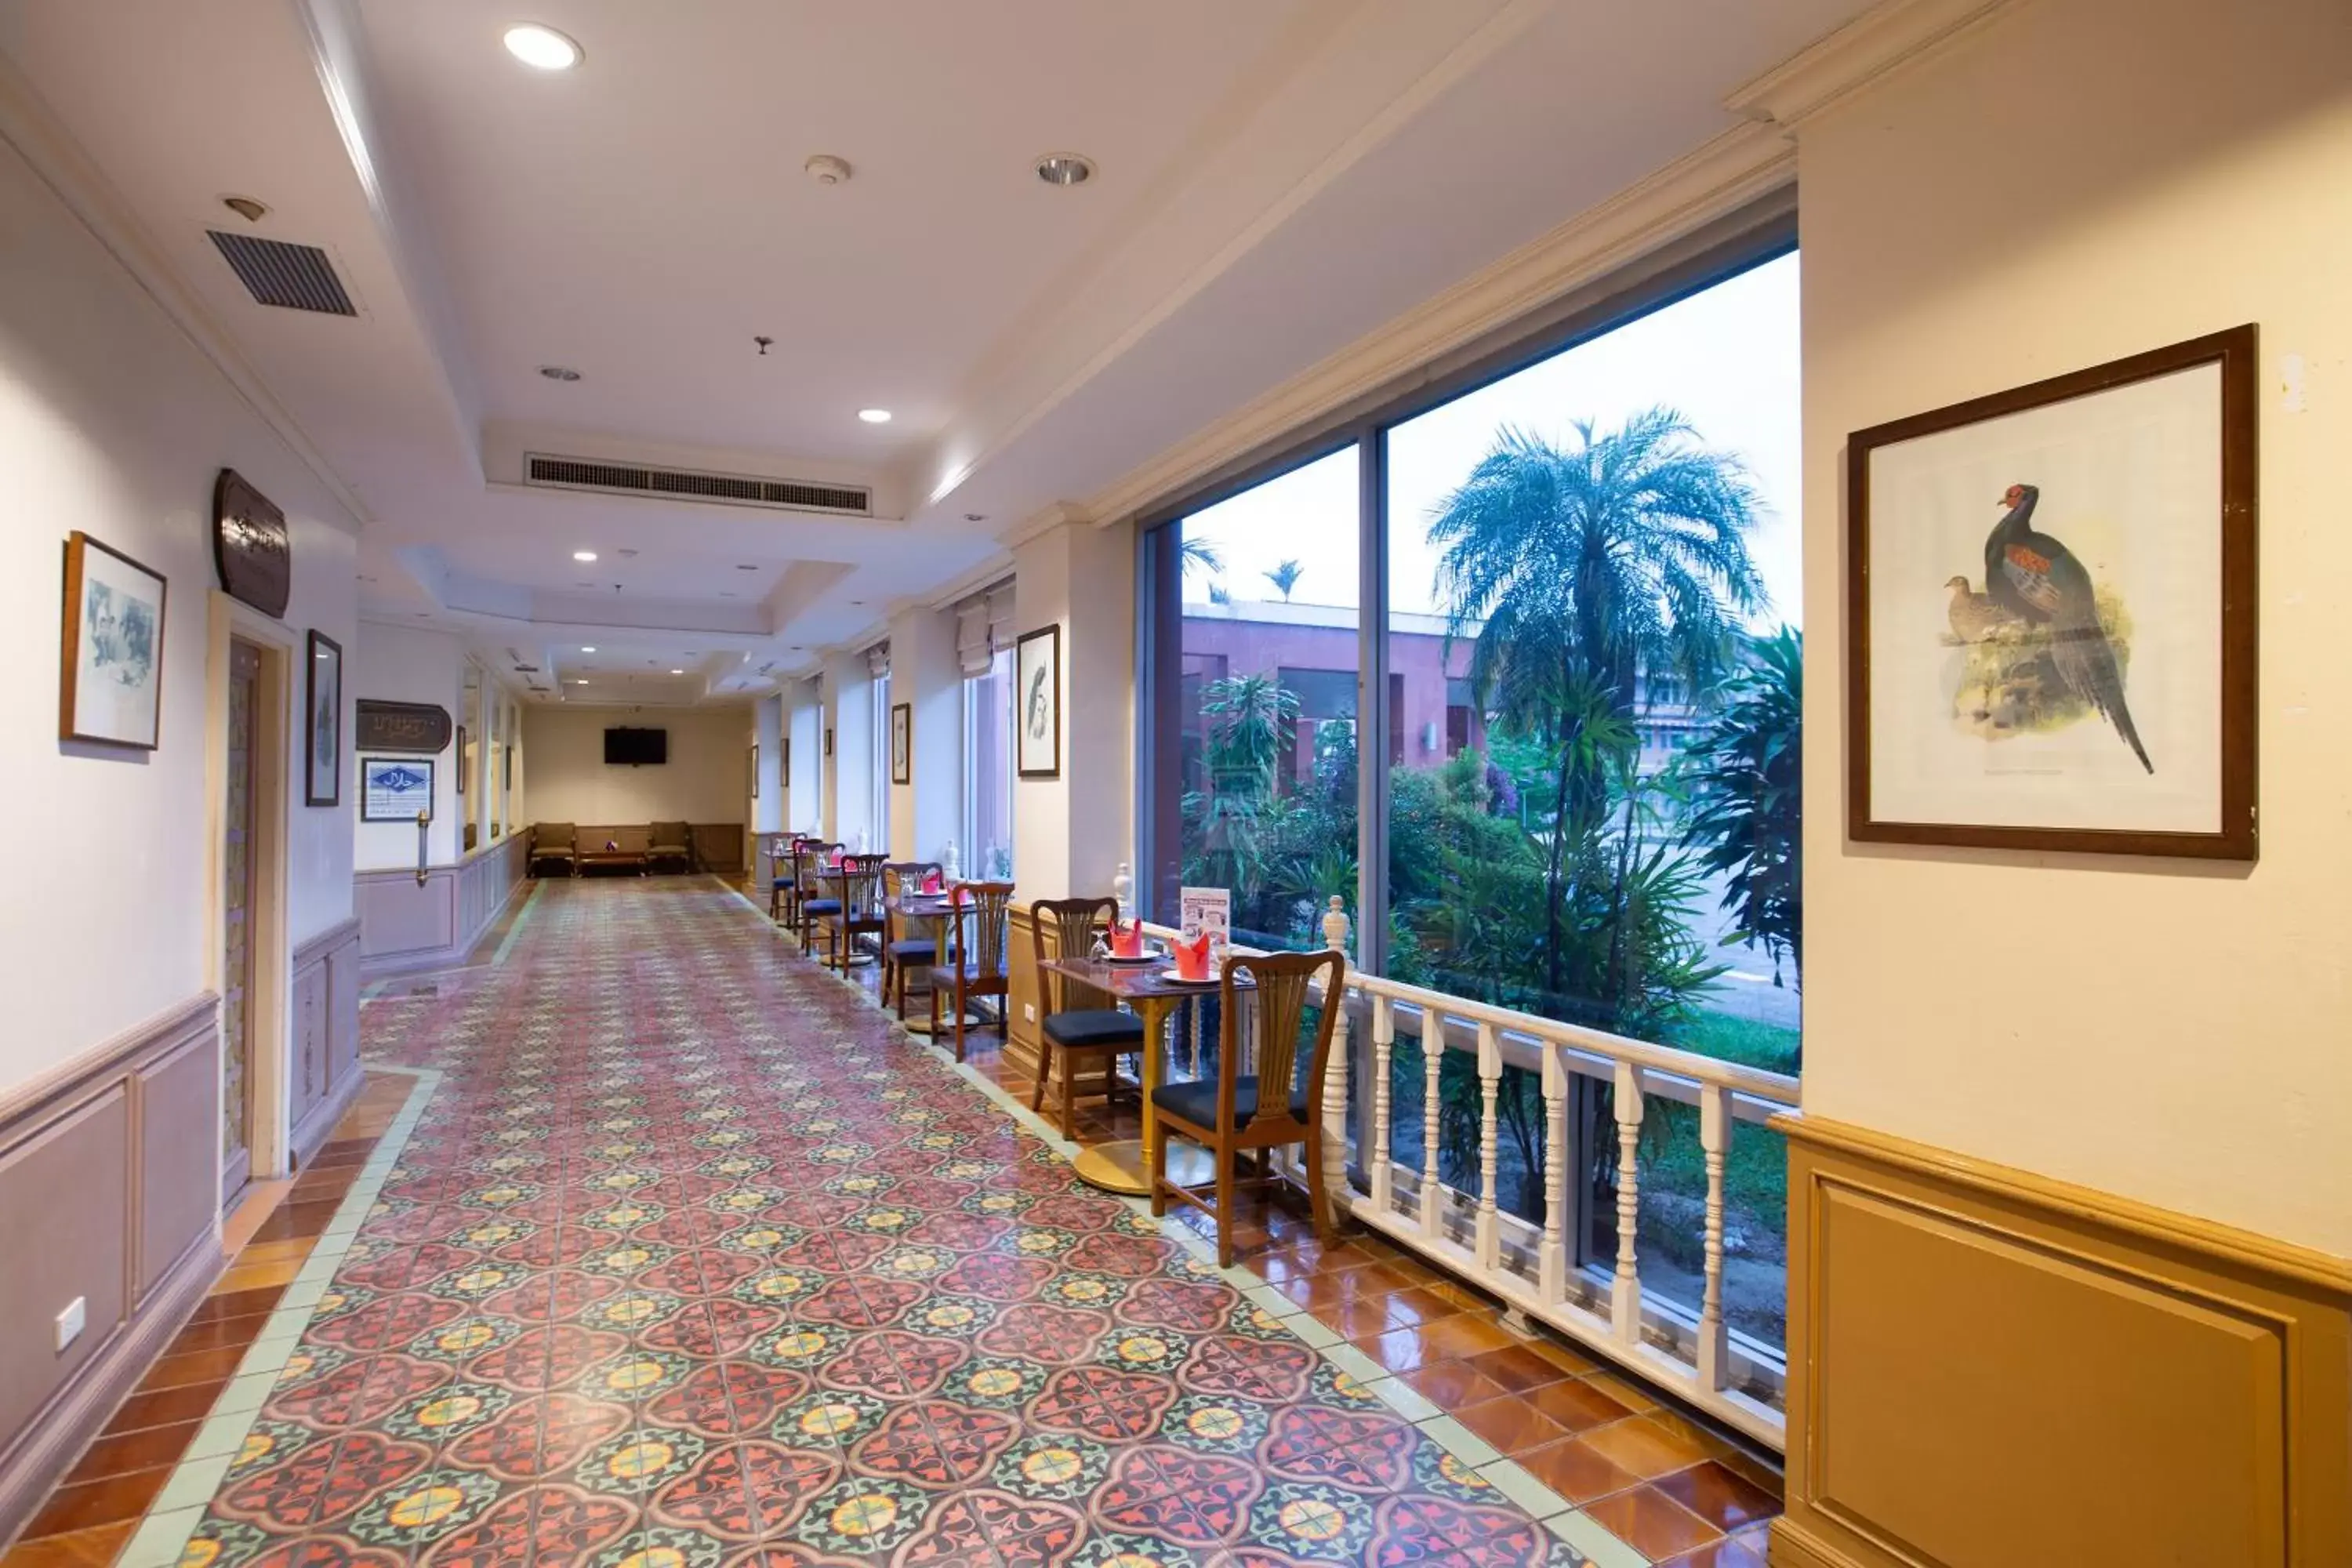 Property building in The Imperial Narathiwat Hotel